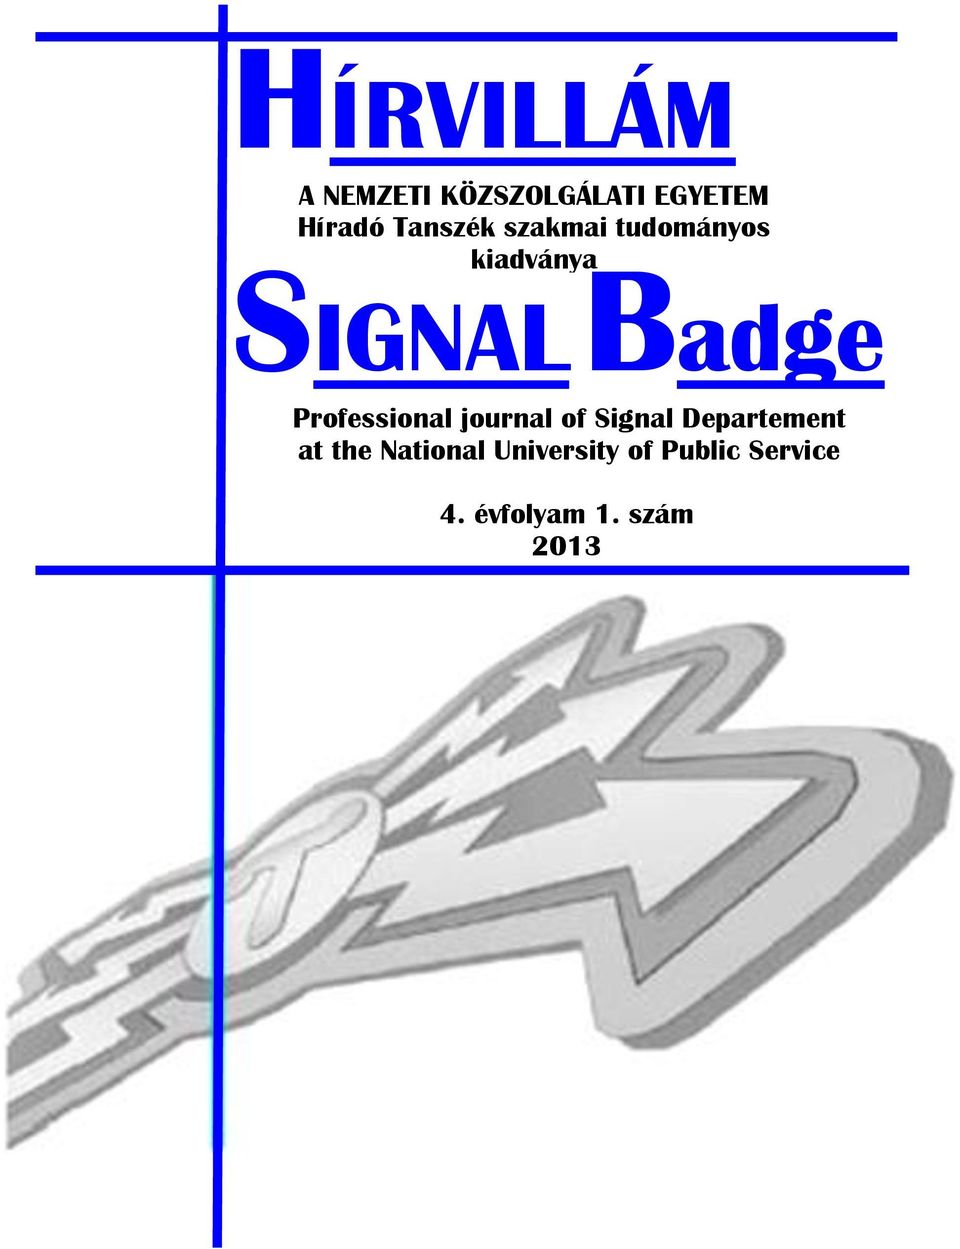 Professional journal of Signal Departement at the